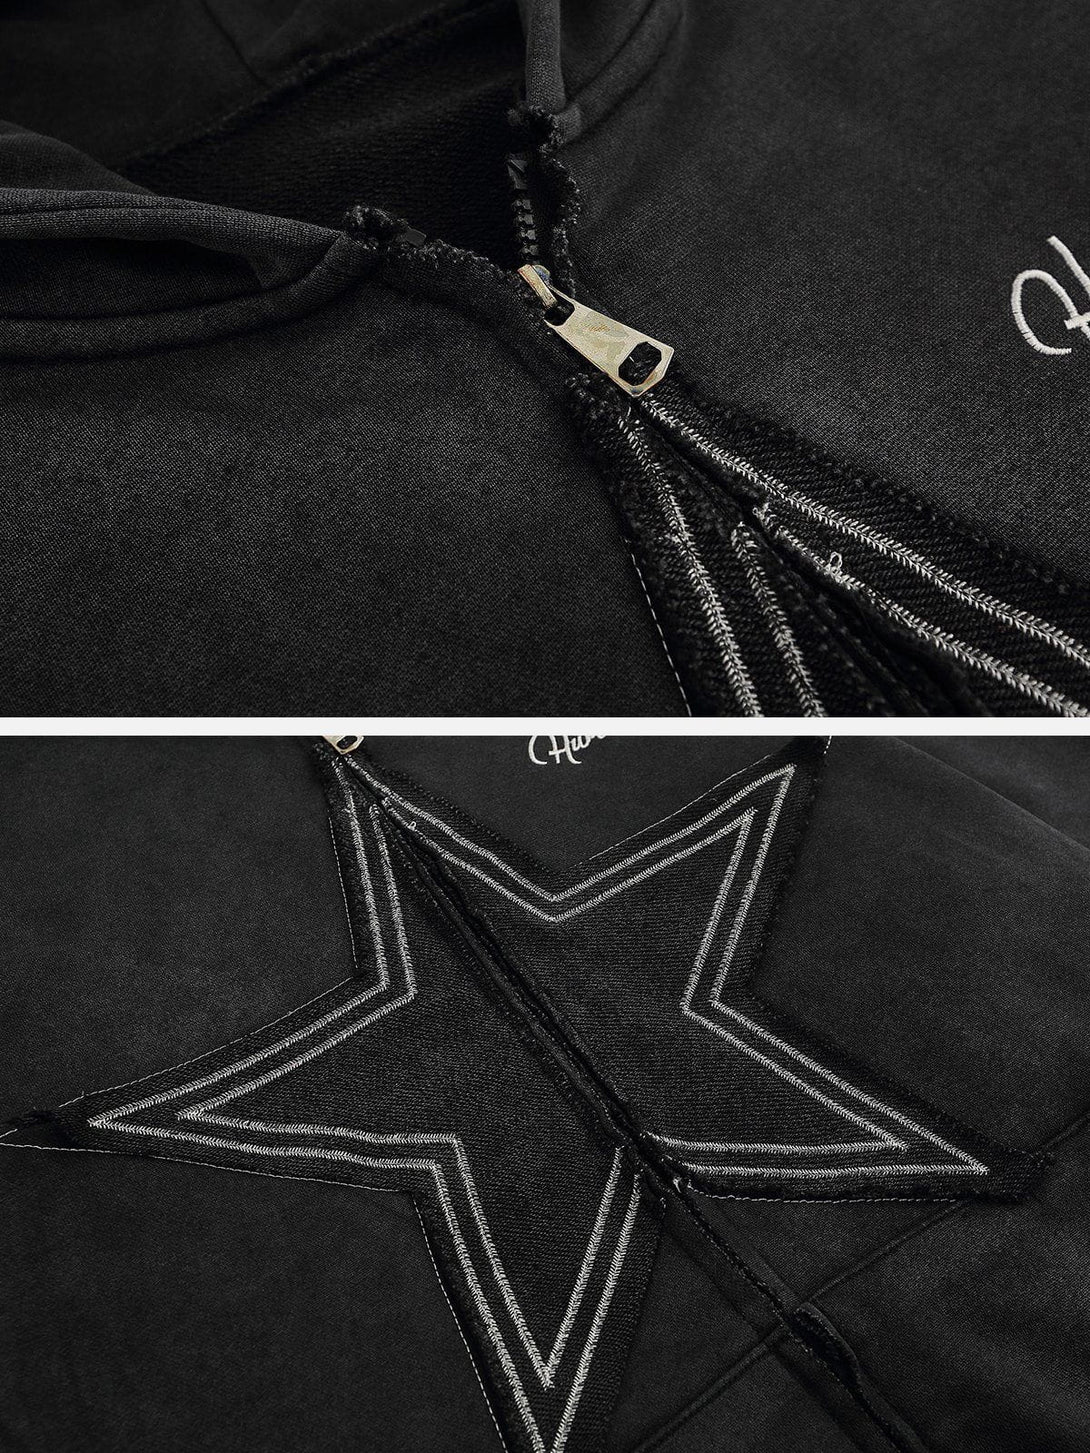 Levefly - Star Washed Zip-up Hoodie - Streetwear Fashion - levefly.com